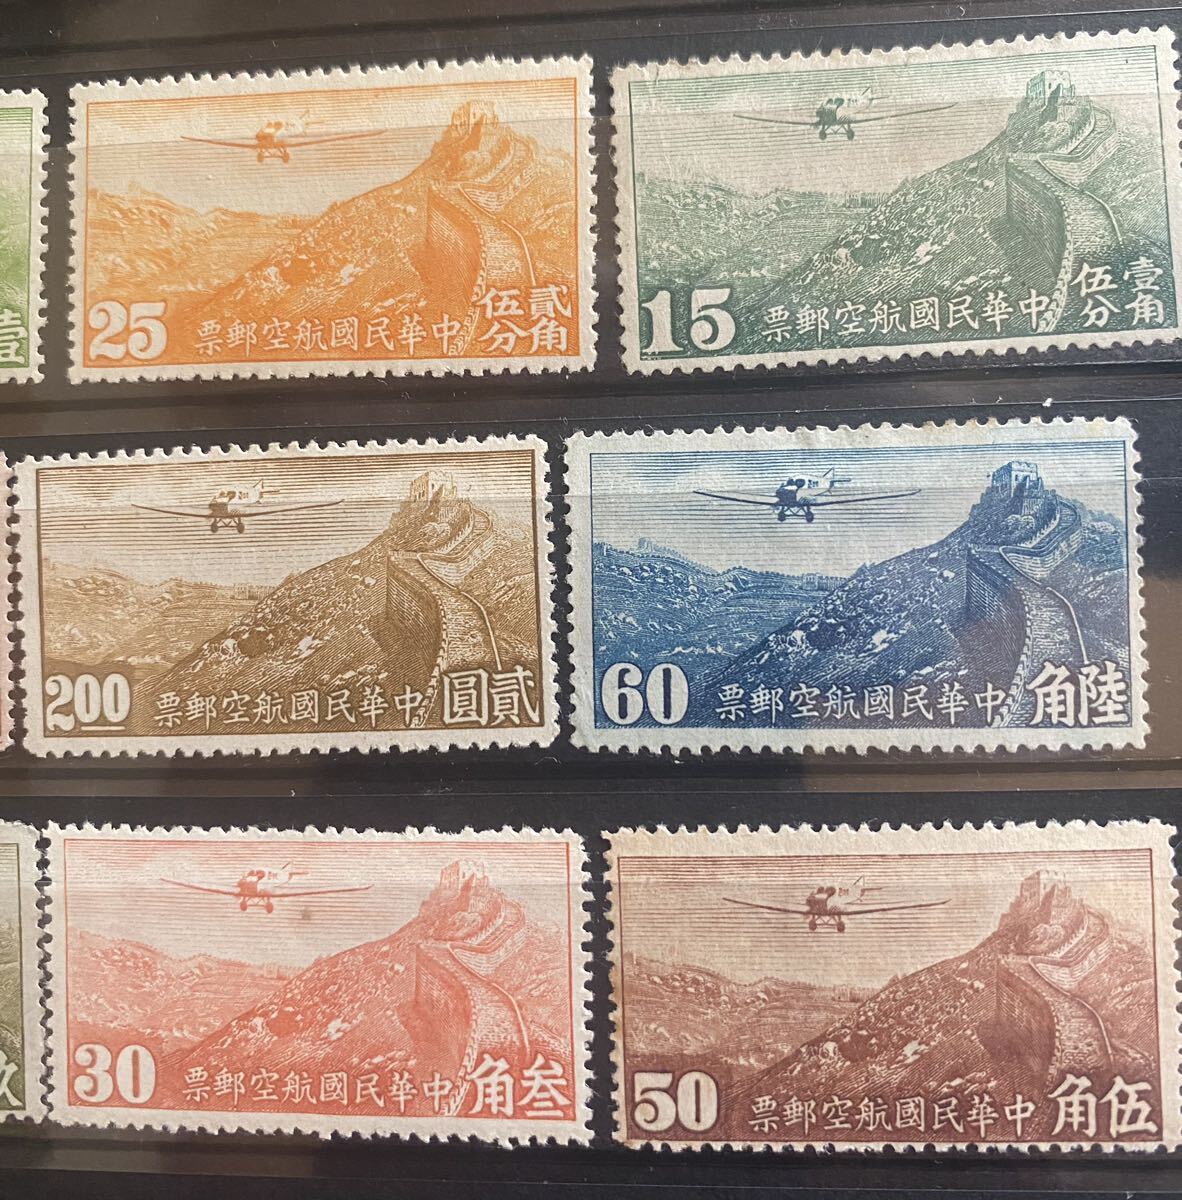  Chinese . country stamp aviation stamp unused summarize 